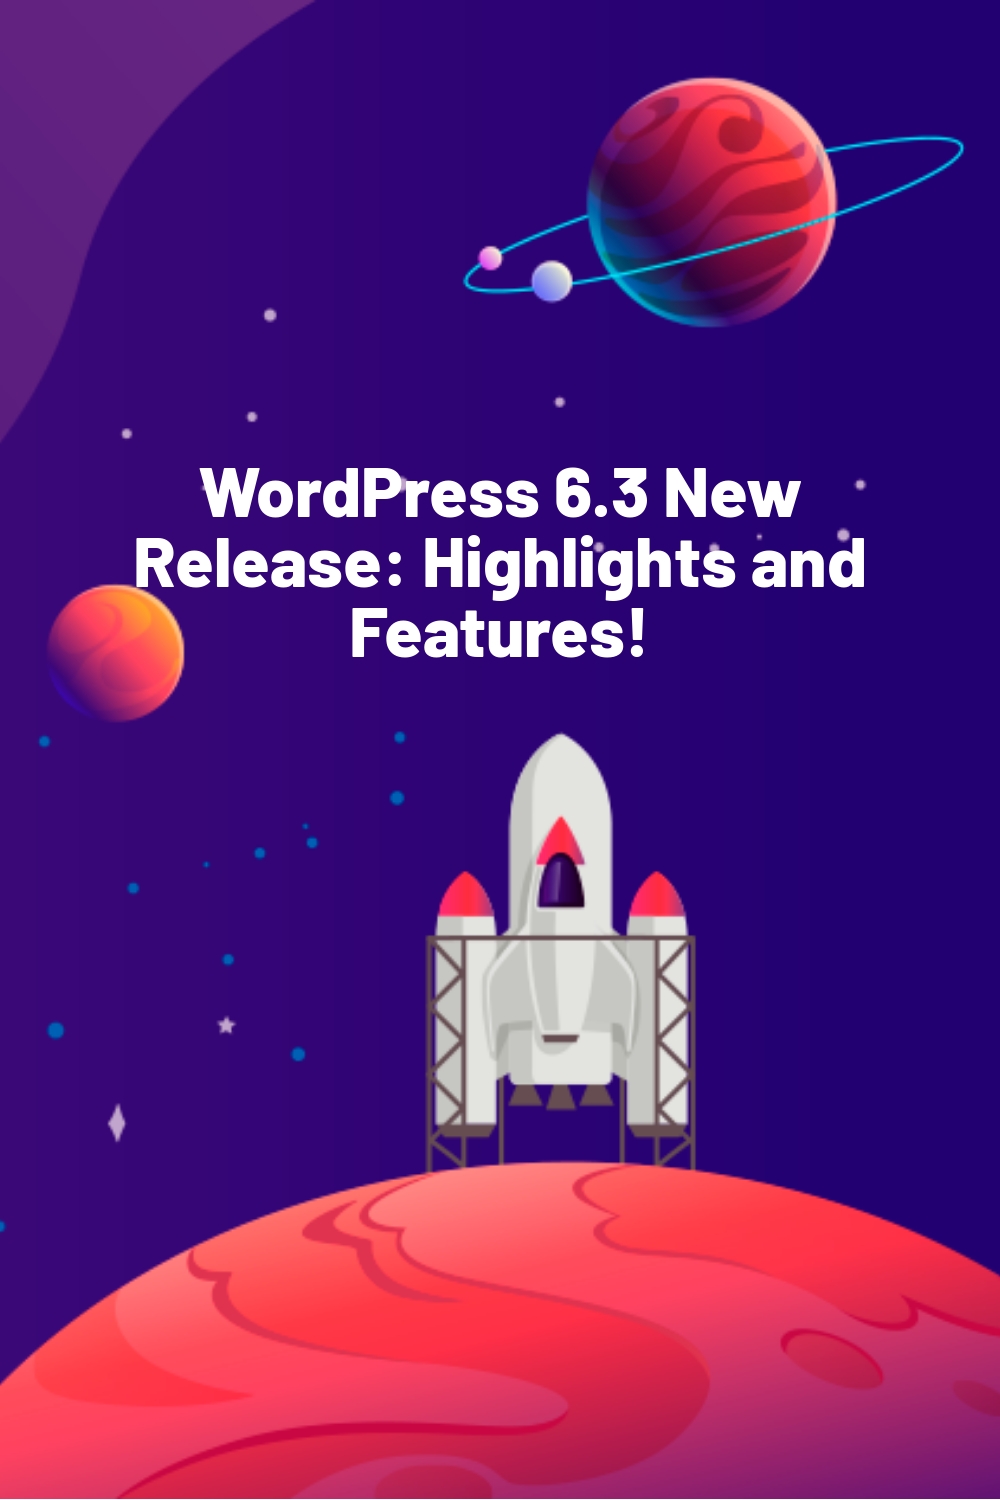 WordPress 6.3 New Release: Highlights and Features!